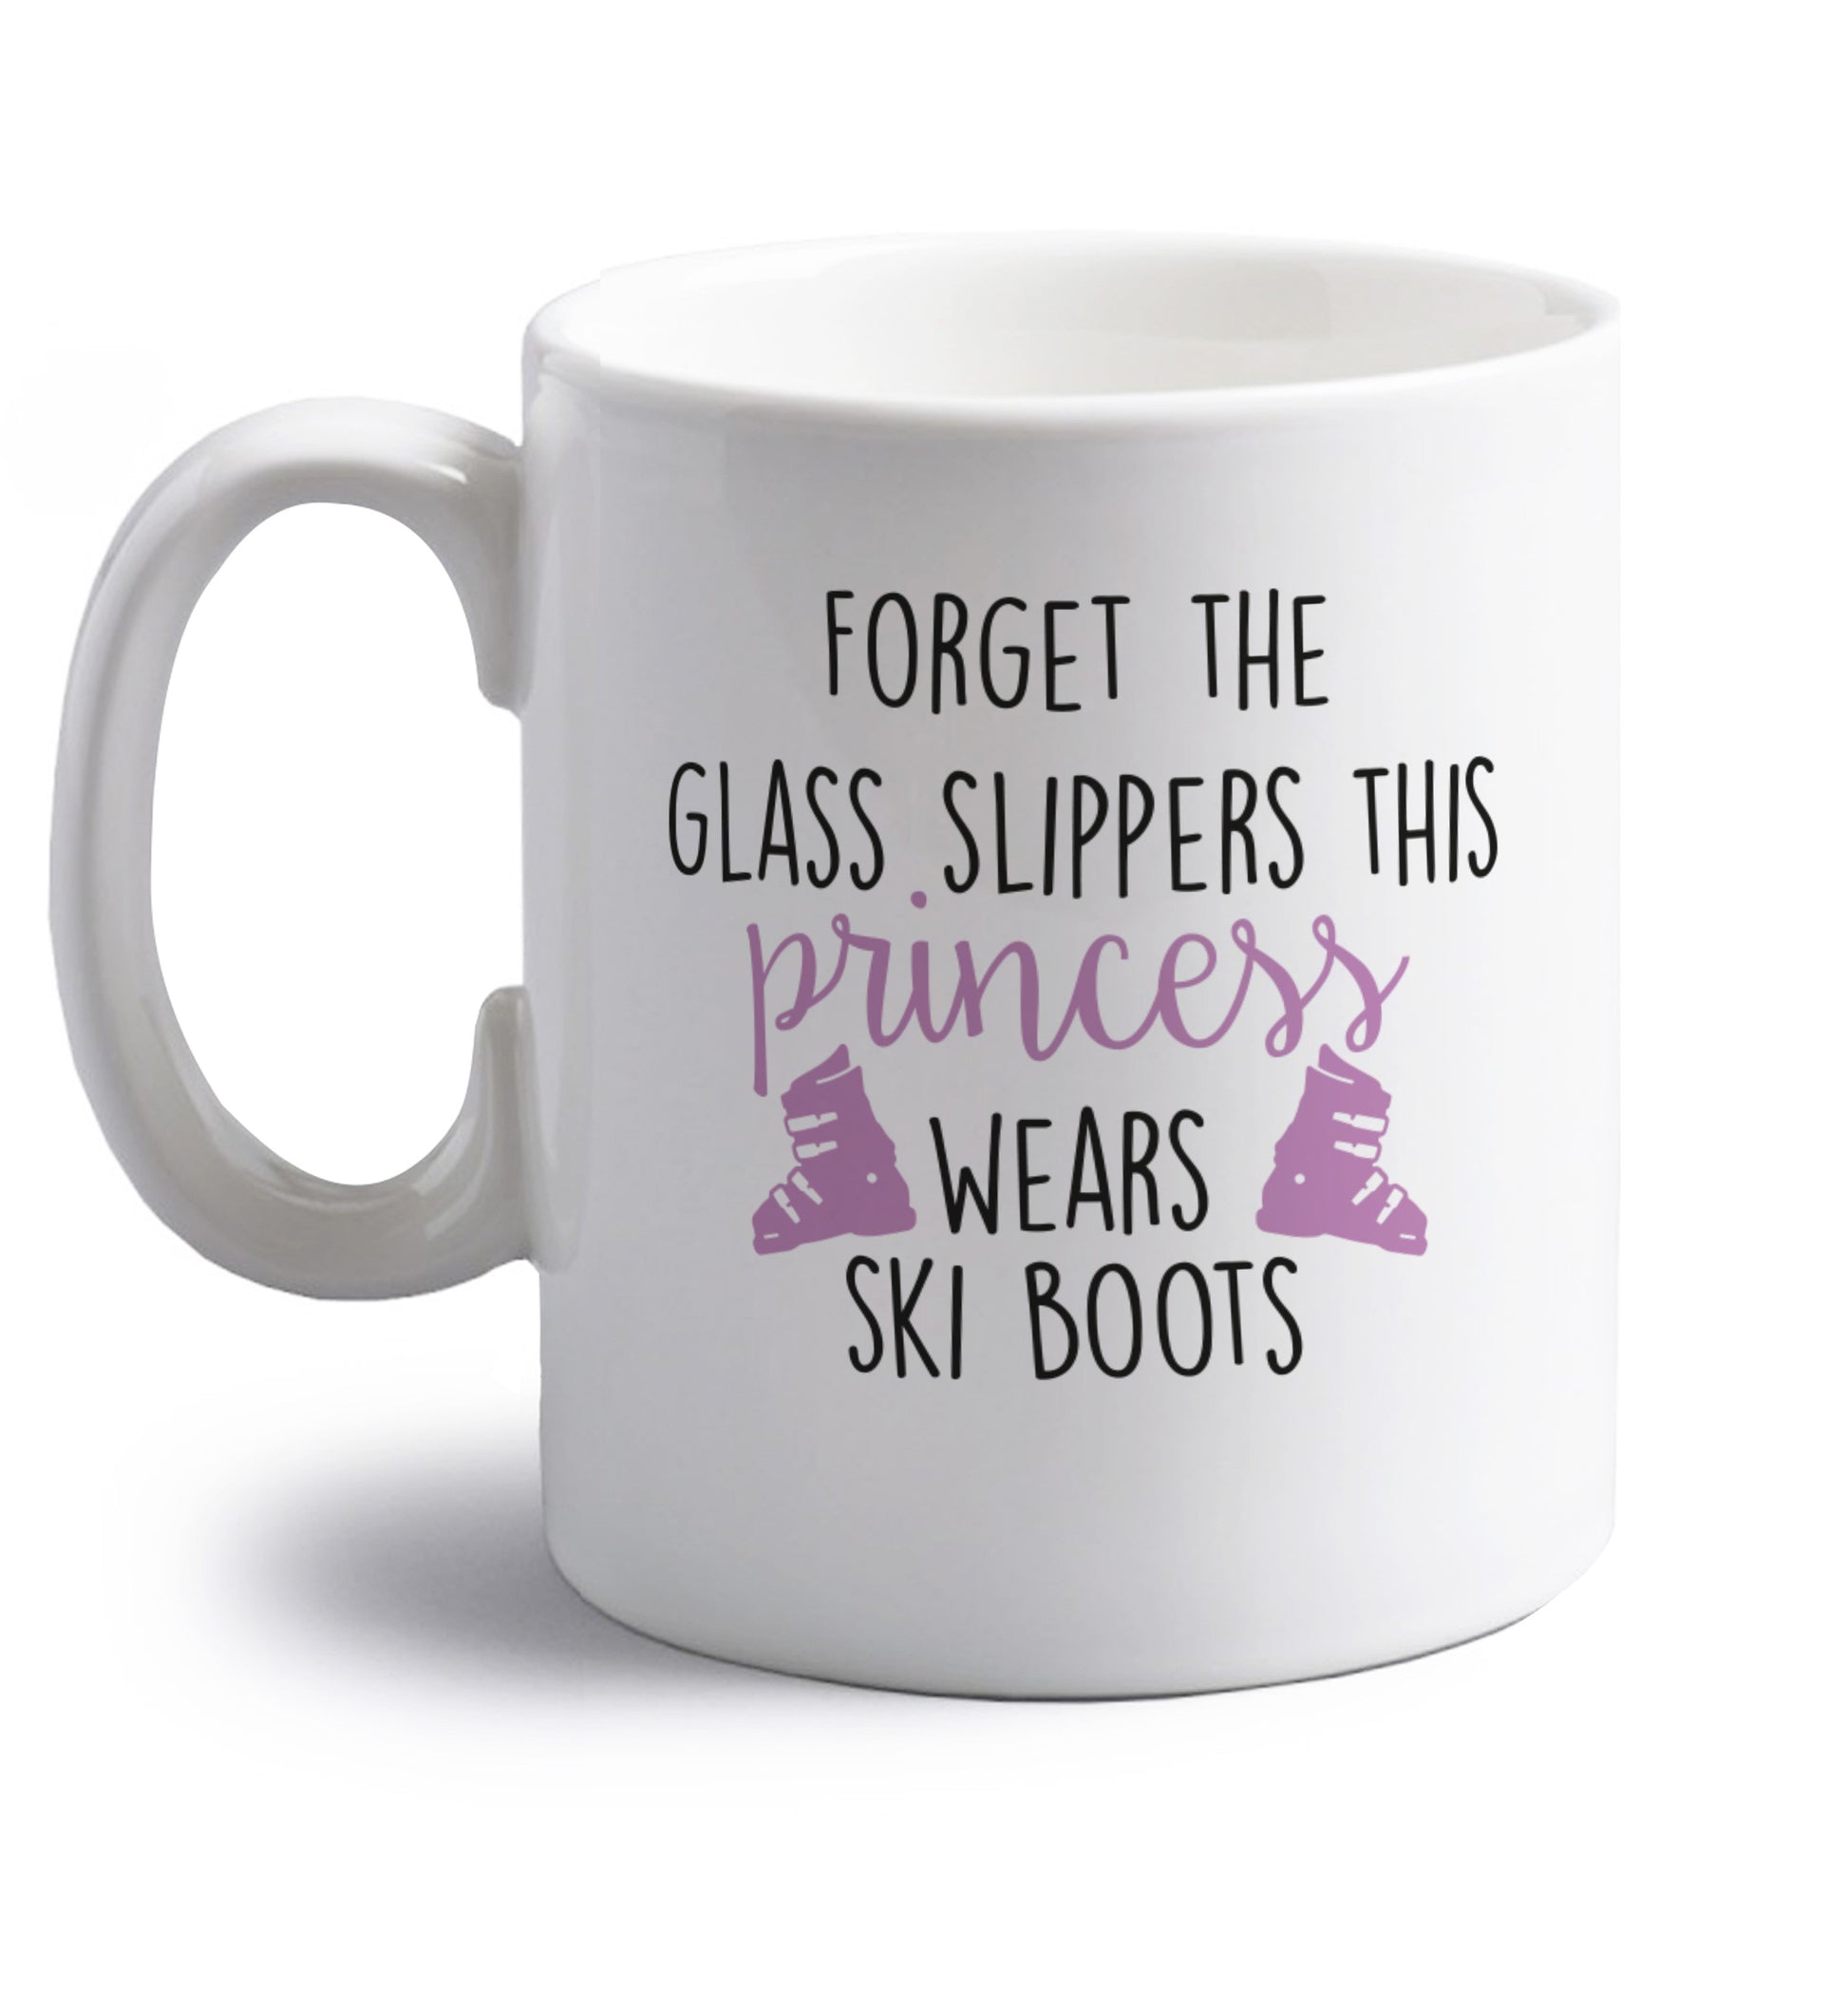 Forget the glass slippers this princess wears ski boots right handed white ceramic mug 